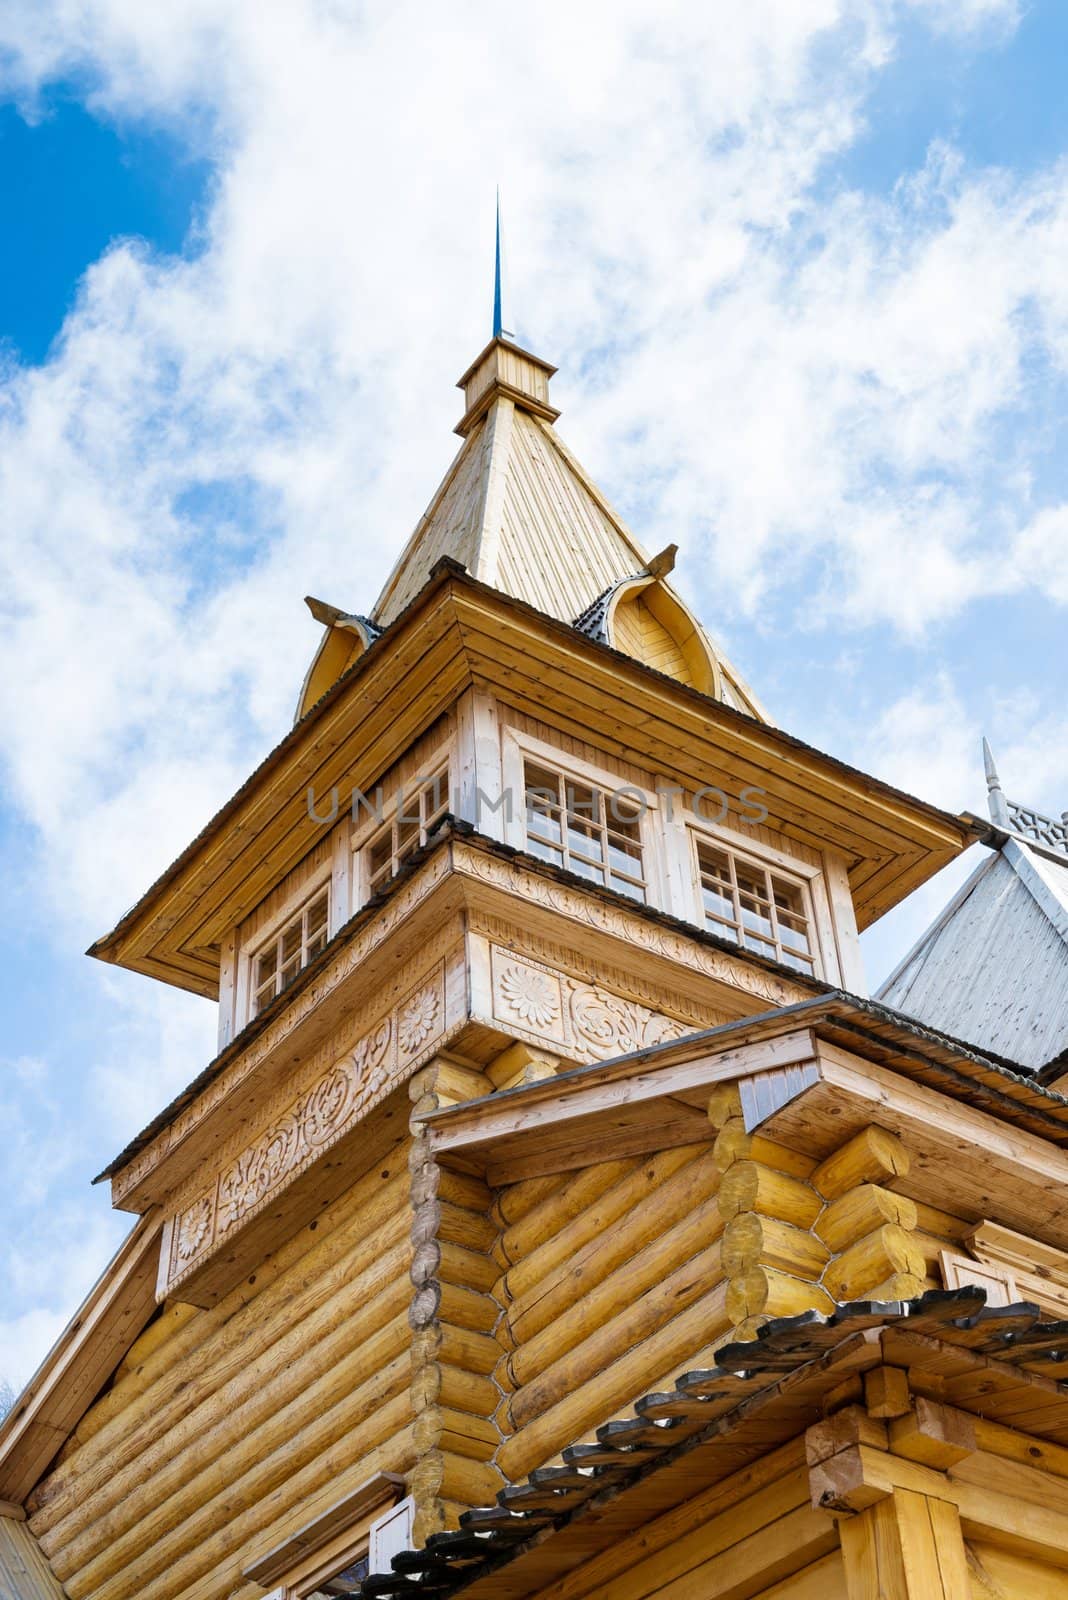 Wooden log house with blue cloudy sky above, Russian traditional architecture.